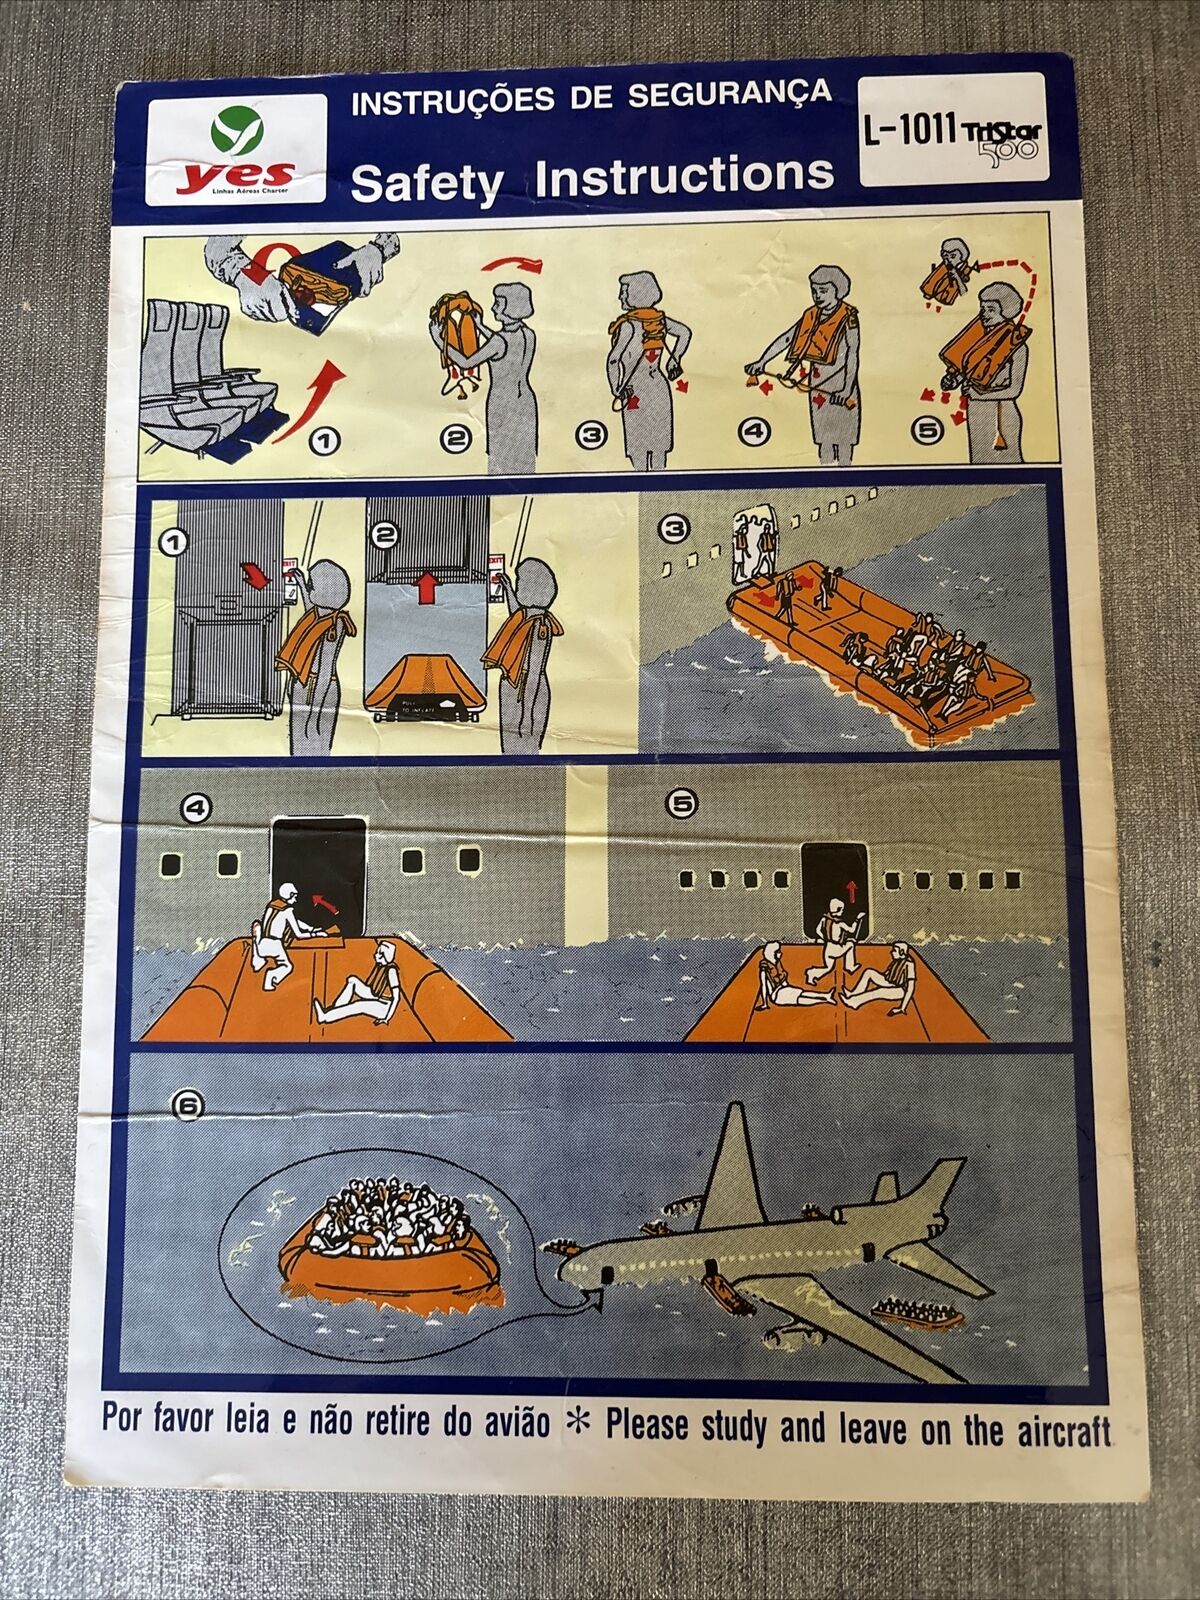 SAFETY CARD YES L-1011 tristar500